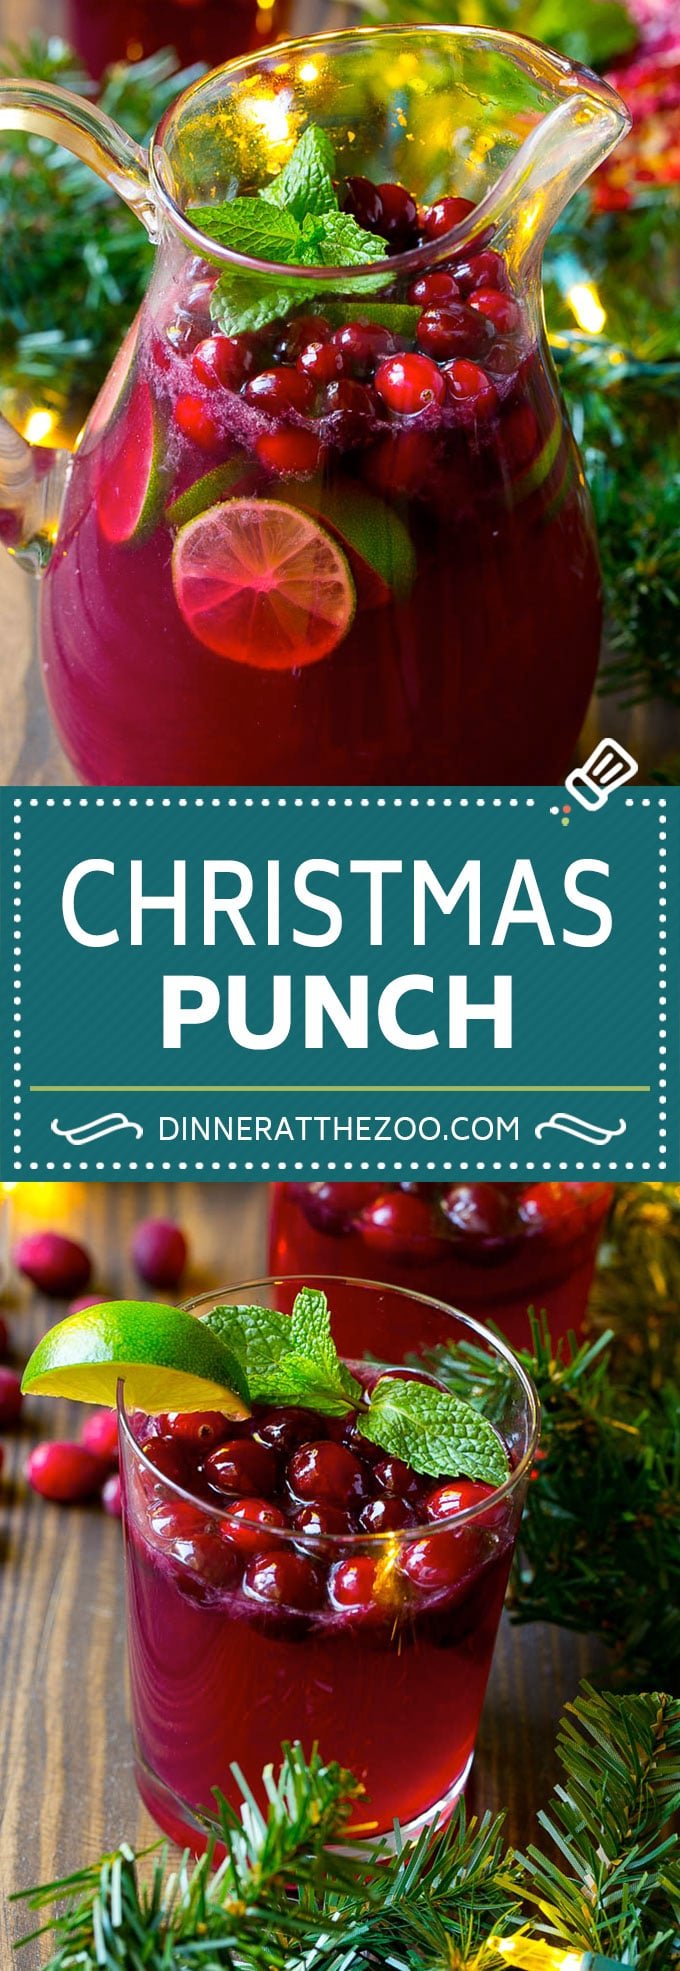 Christmas Punch | Holiday Punch | Cranberry Punch #punch #drink #christmas #dinneratthezoo #cranberry #pomegranate